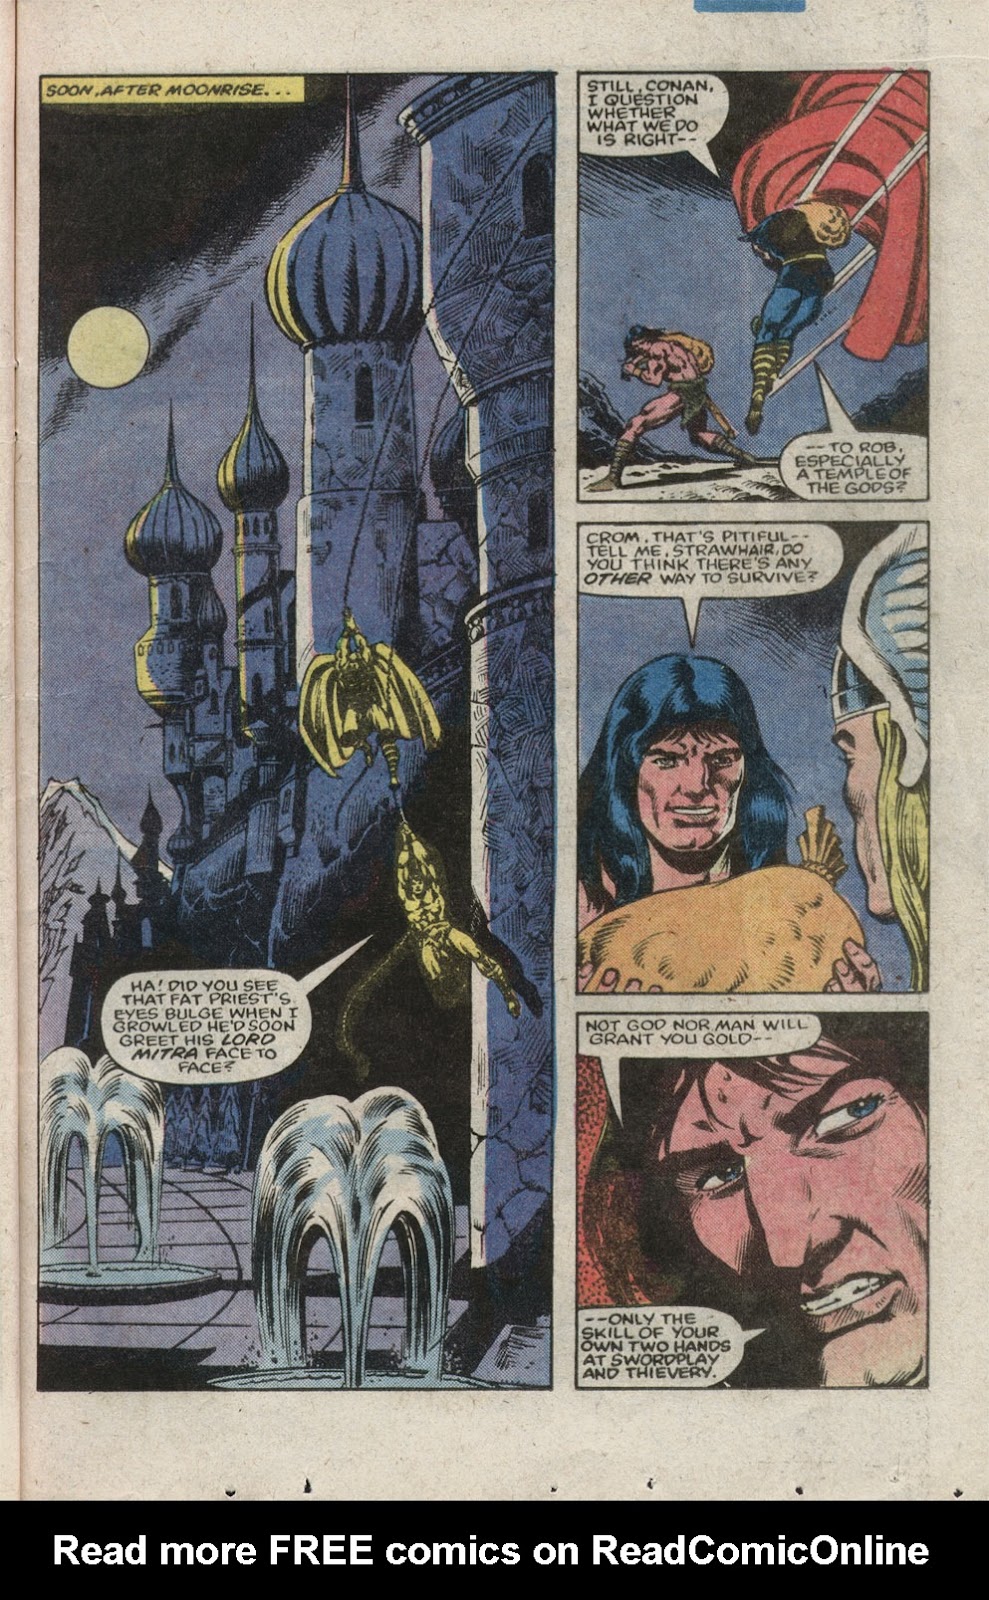 What If? (1977) issue 39 - Thor battled conan - Page 17